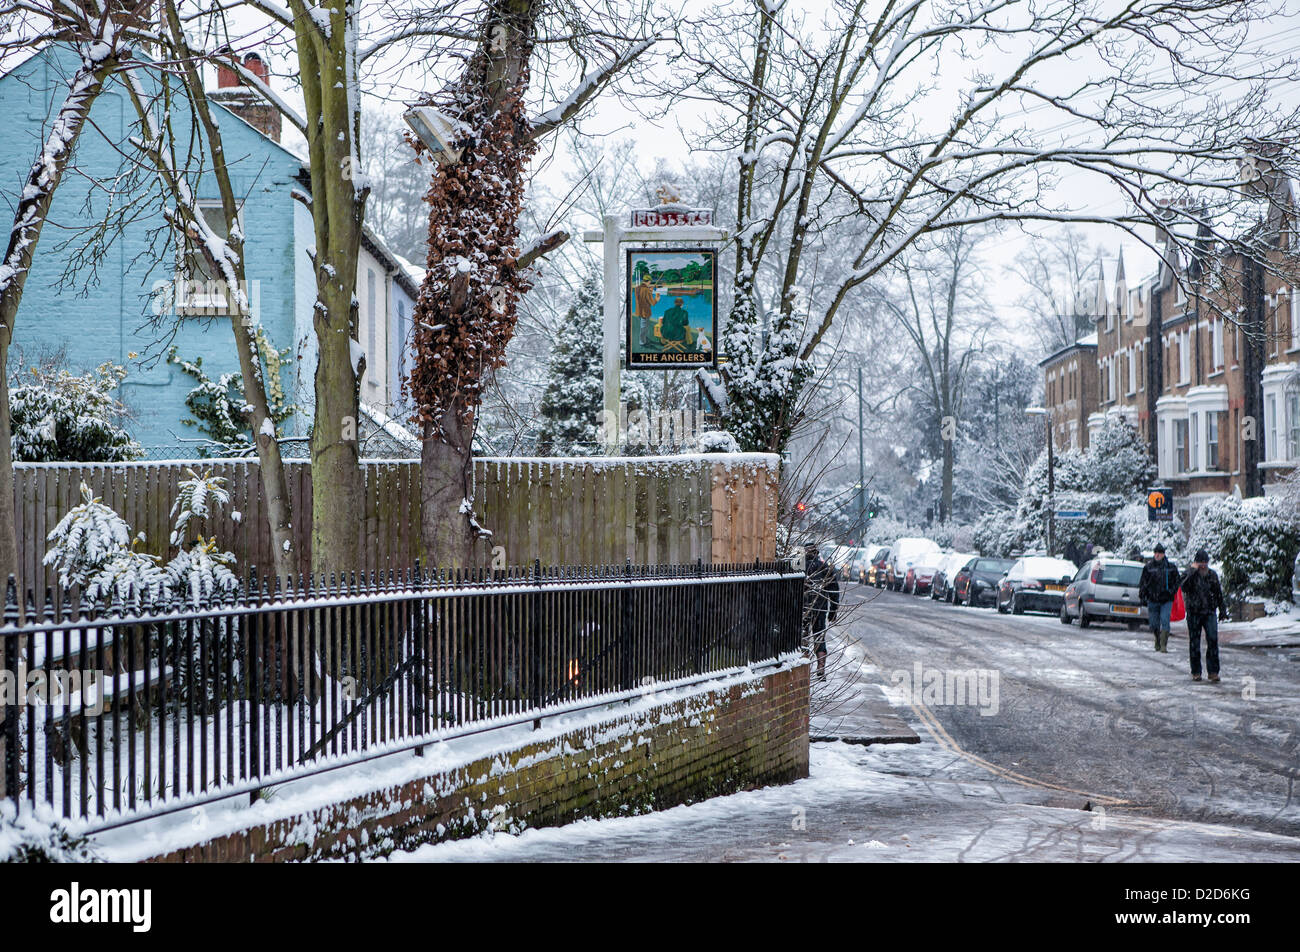 Sign of 'The Anglers' pub in Ferry Road covered in snow in Winter - Teddington, UK Stock Photo